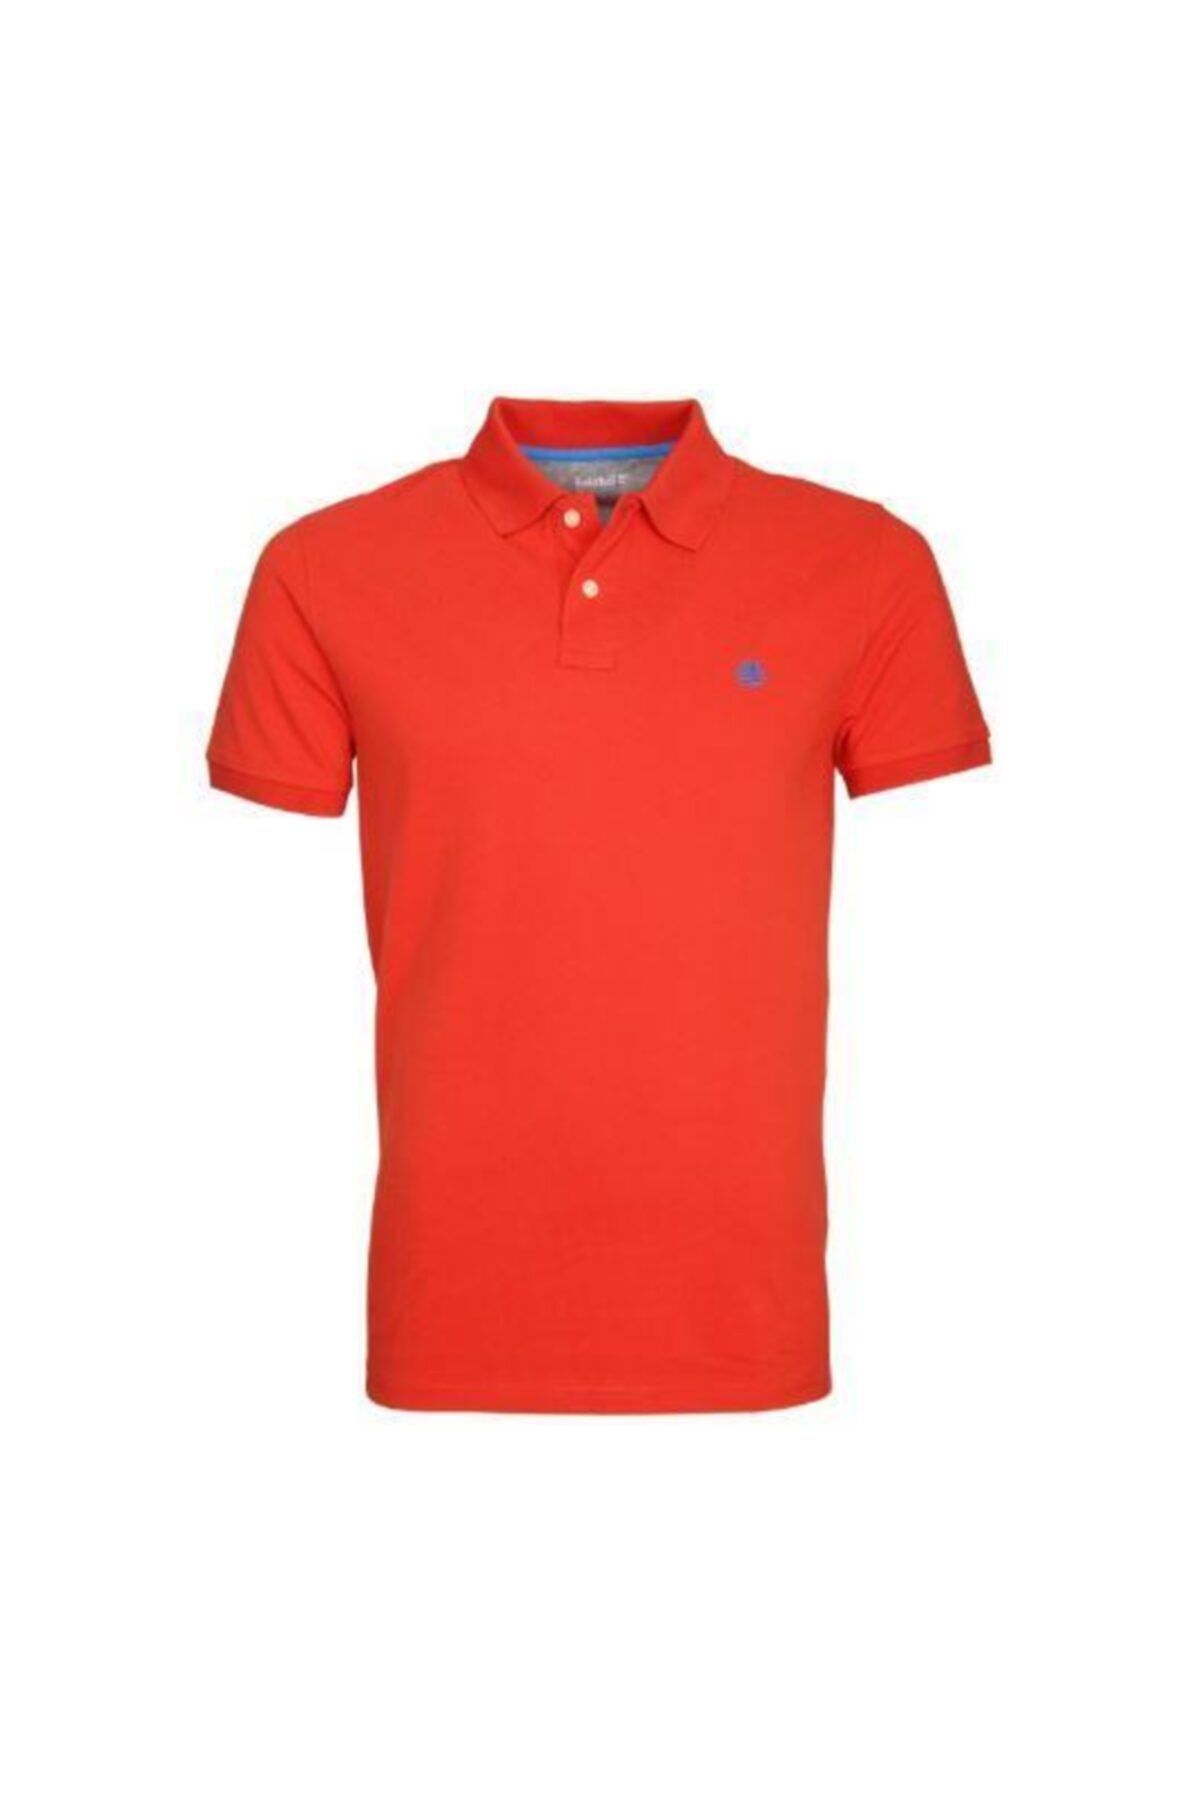 Timberland Millers River Pique Polo Yaka T-shirt